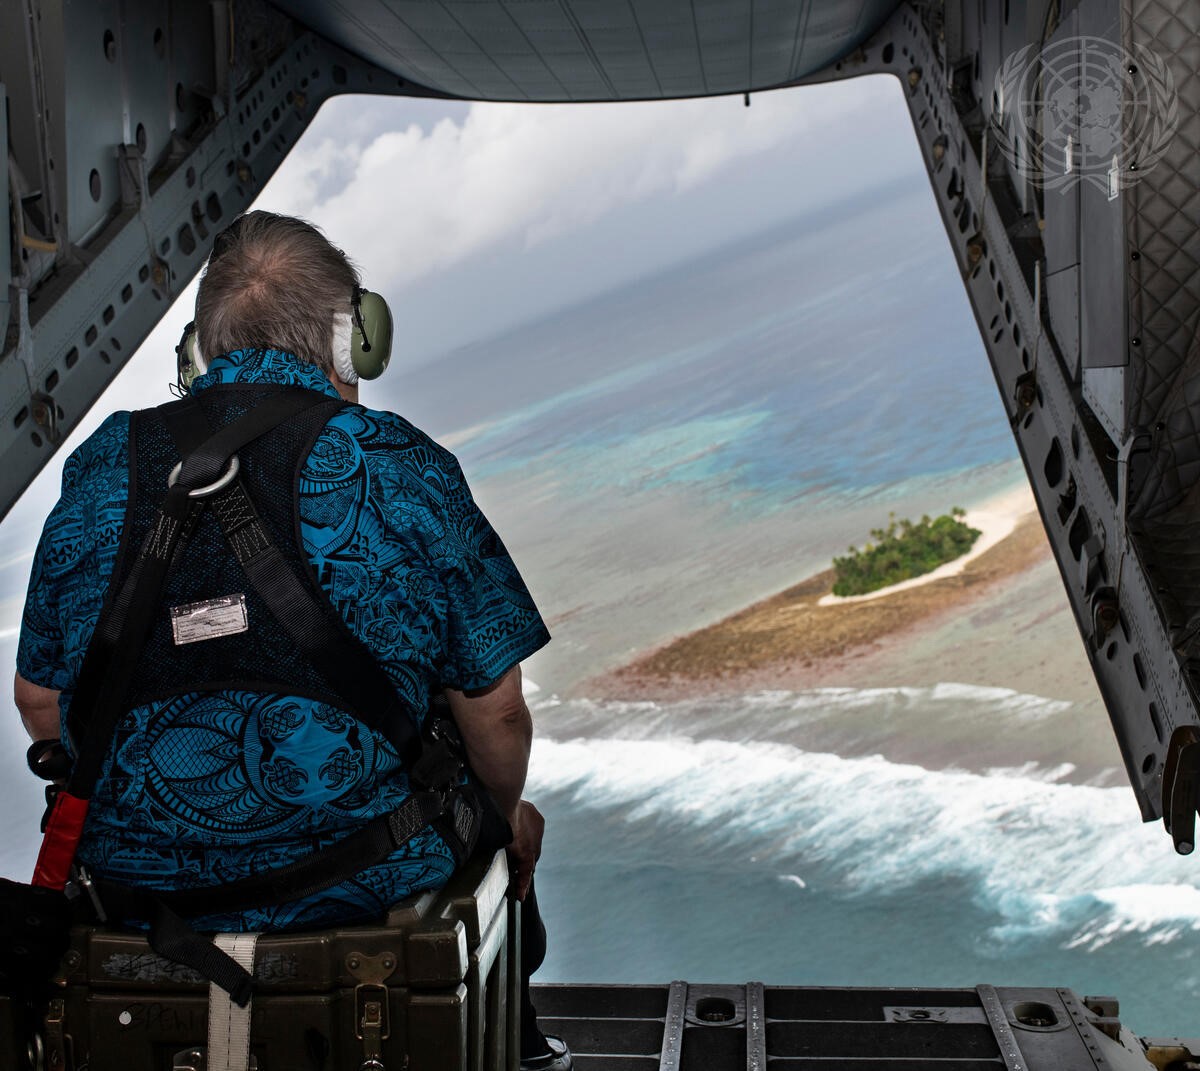 Figure 8. Secretary-General António Guterres looks out over the islands of Tuvalu from the back of the plane during his flight there in 2019. UN Photo/Mark Garten